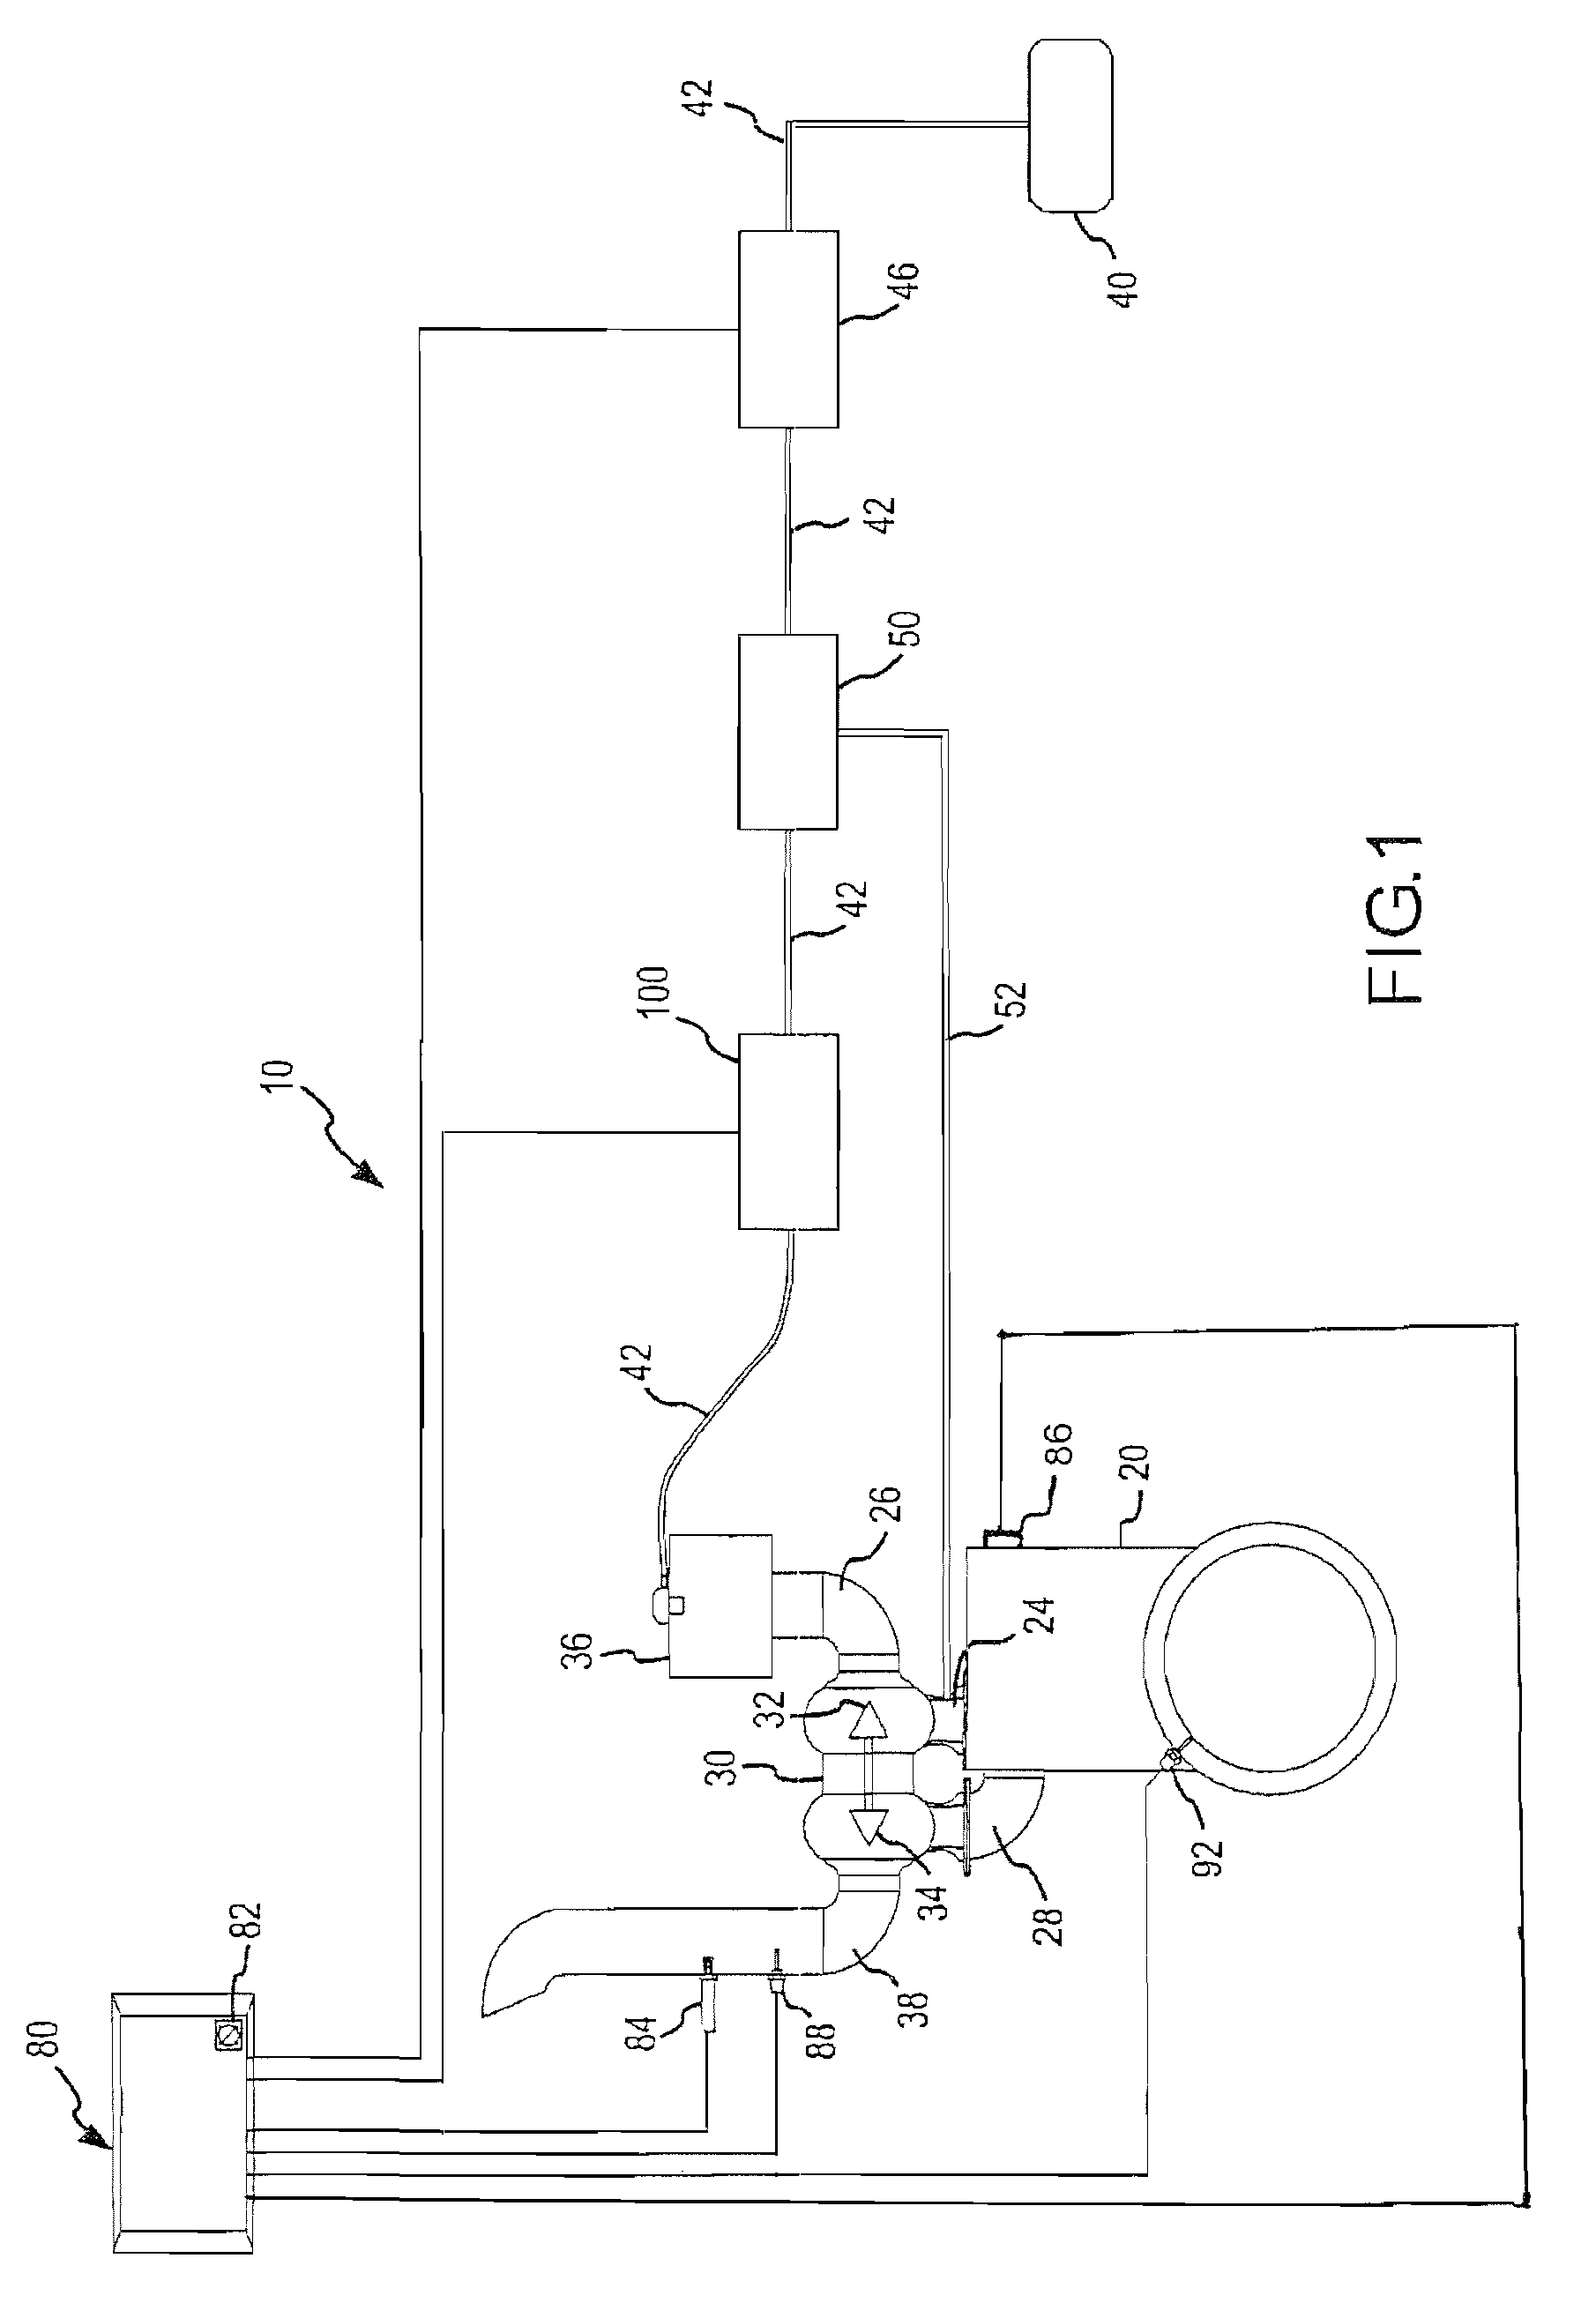 Process for use with dual-fuel systems